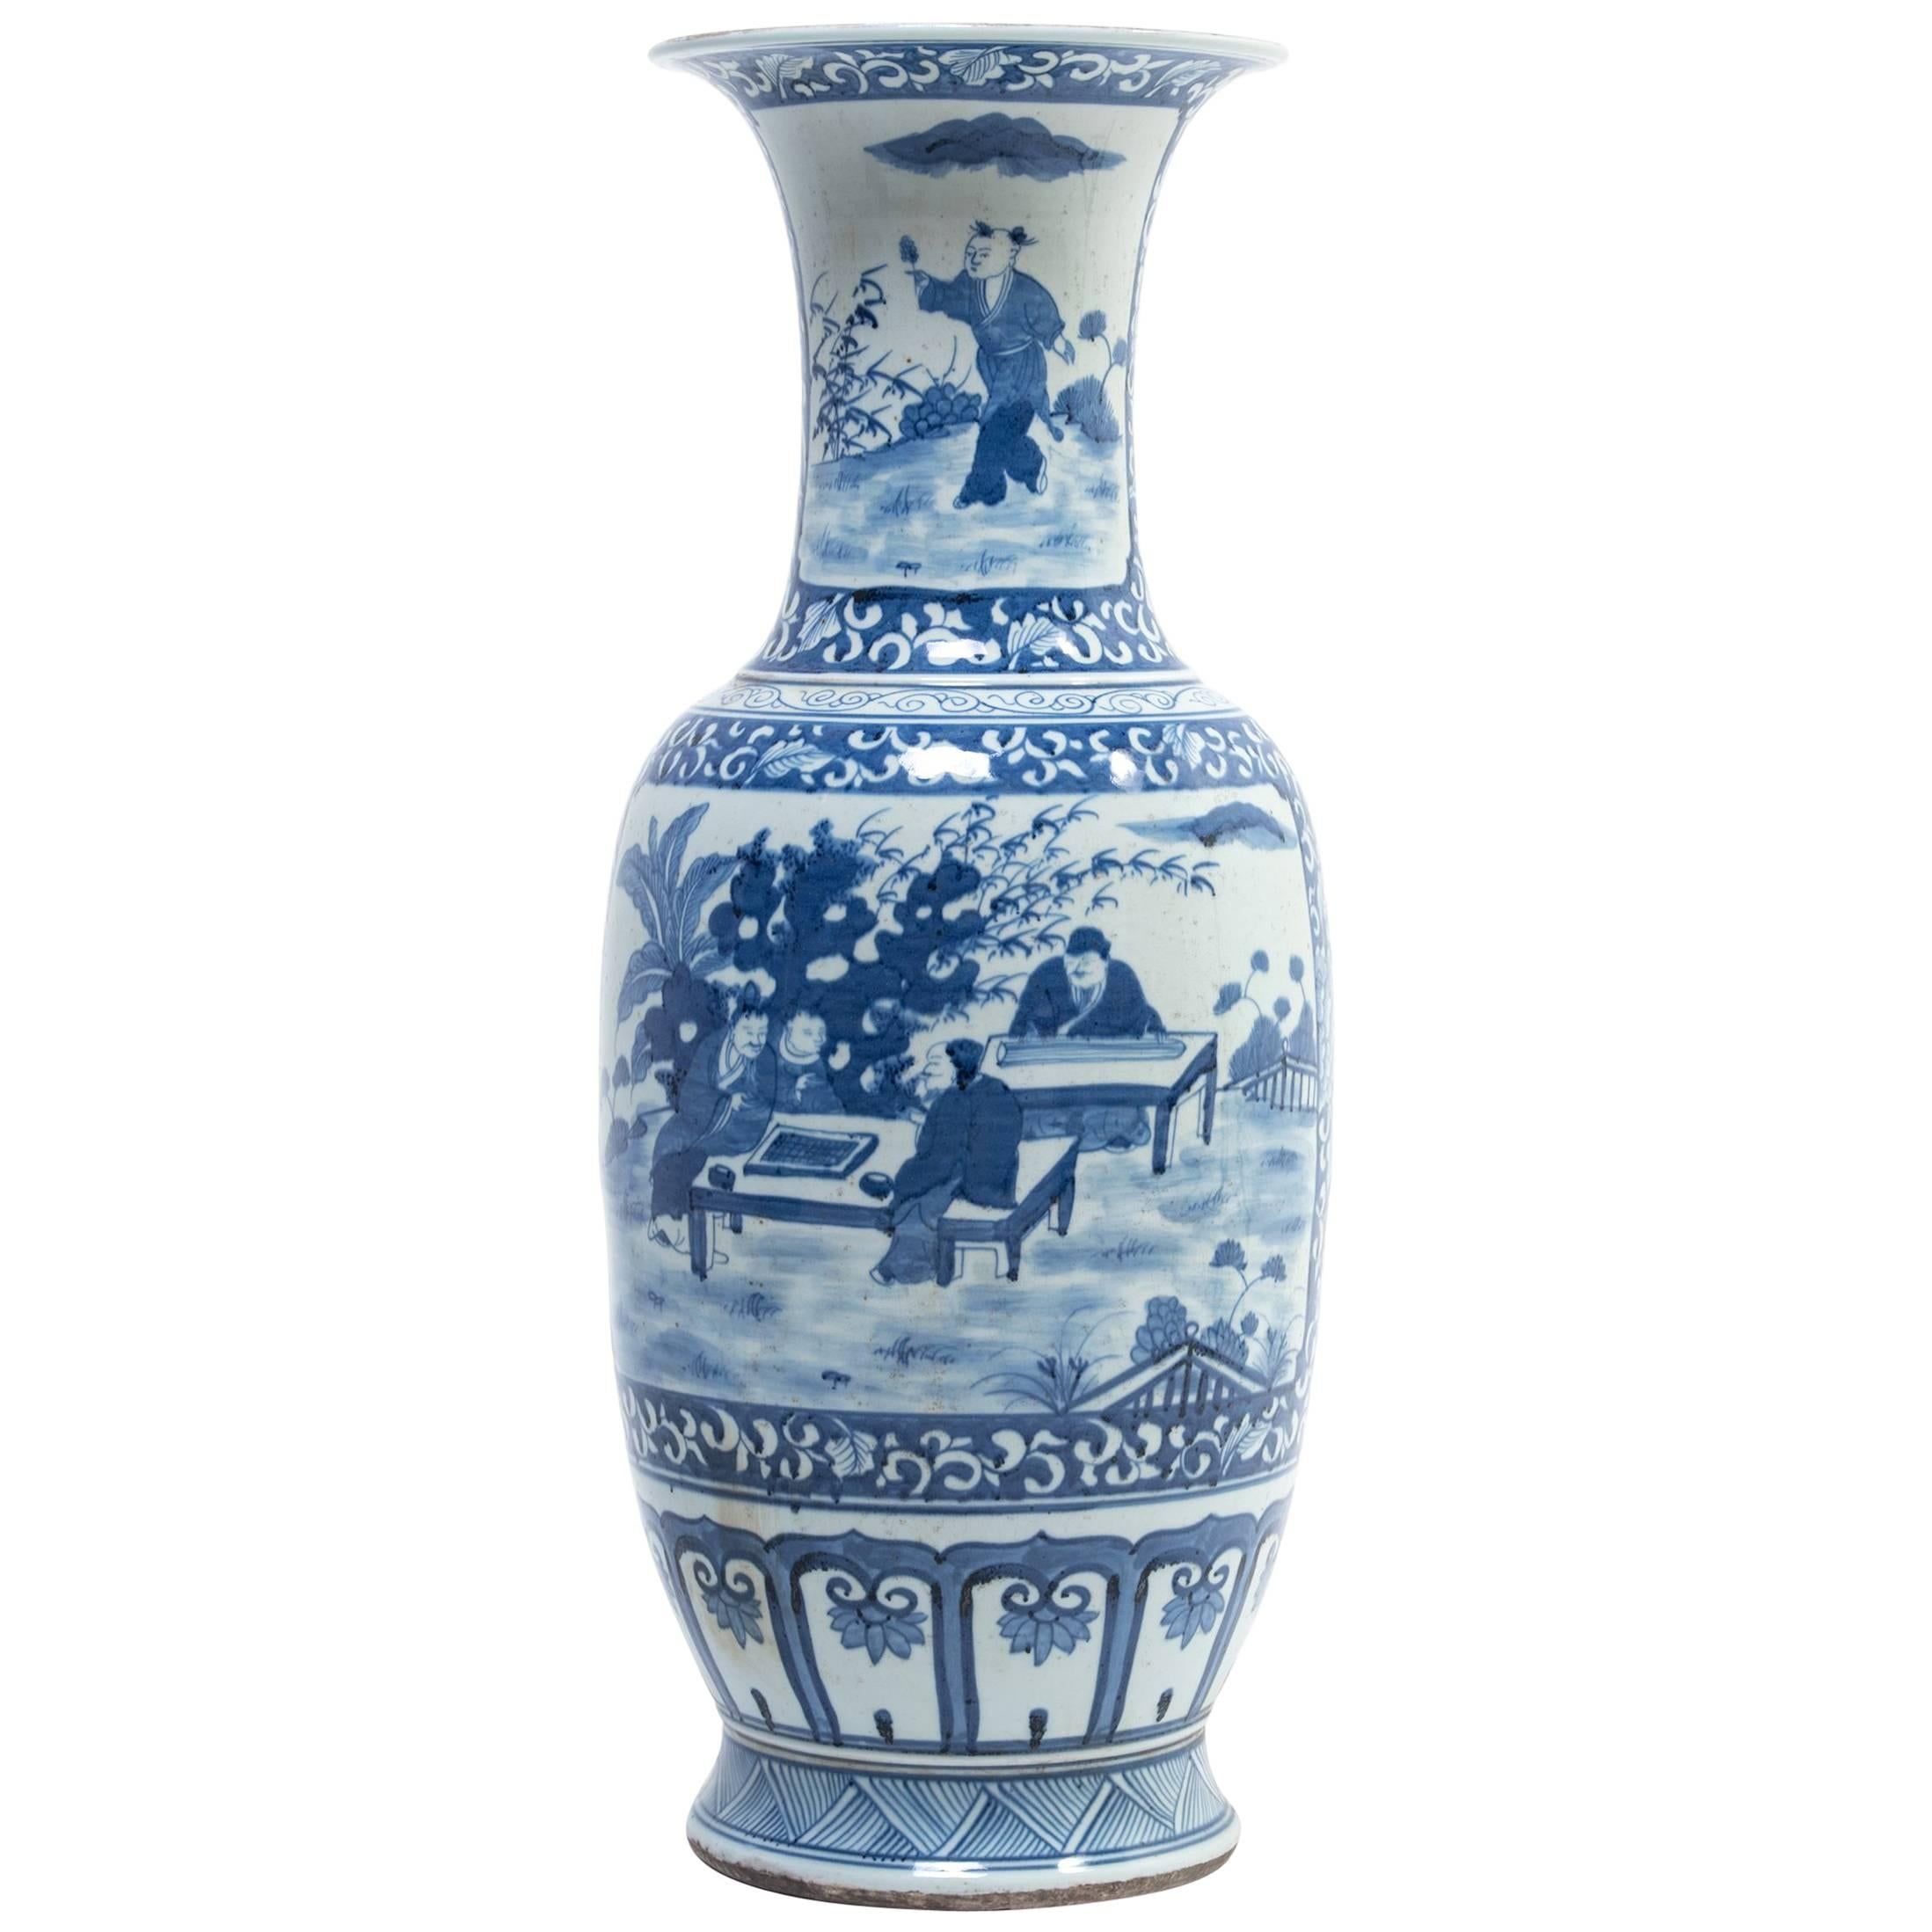 What is the blue and white ceramic called?